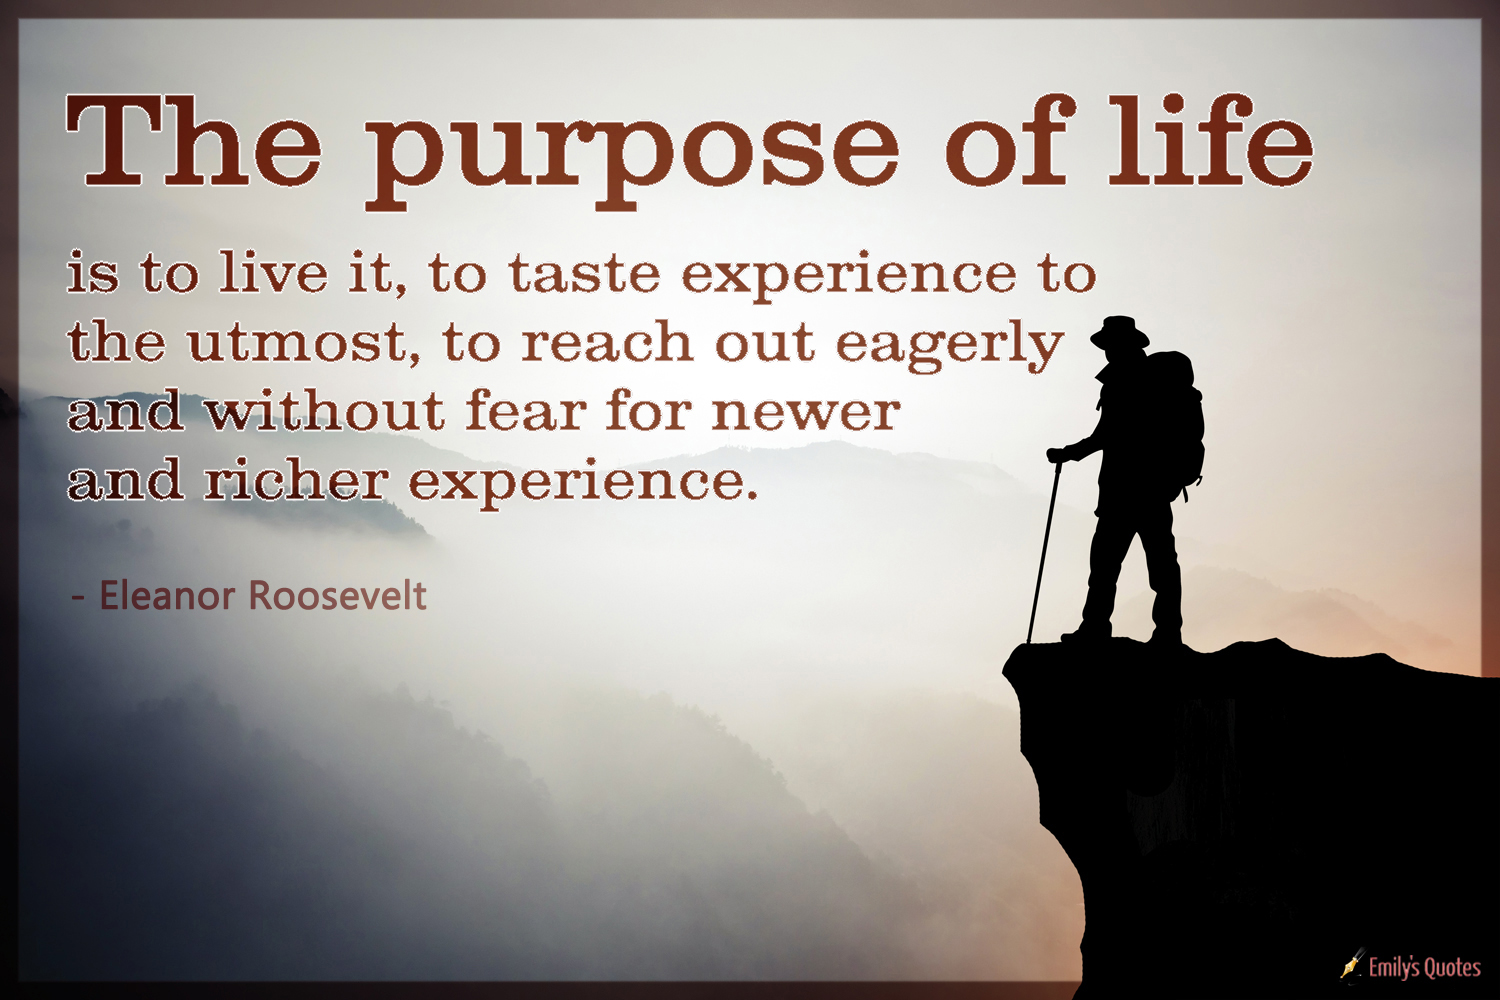 Purpose of life is. Life purpose. What is the purpose of Life. Life purpose quotes. Purpose in Life.